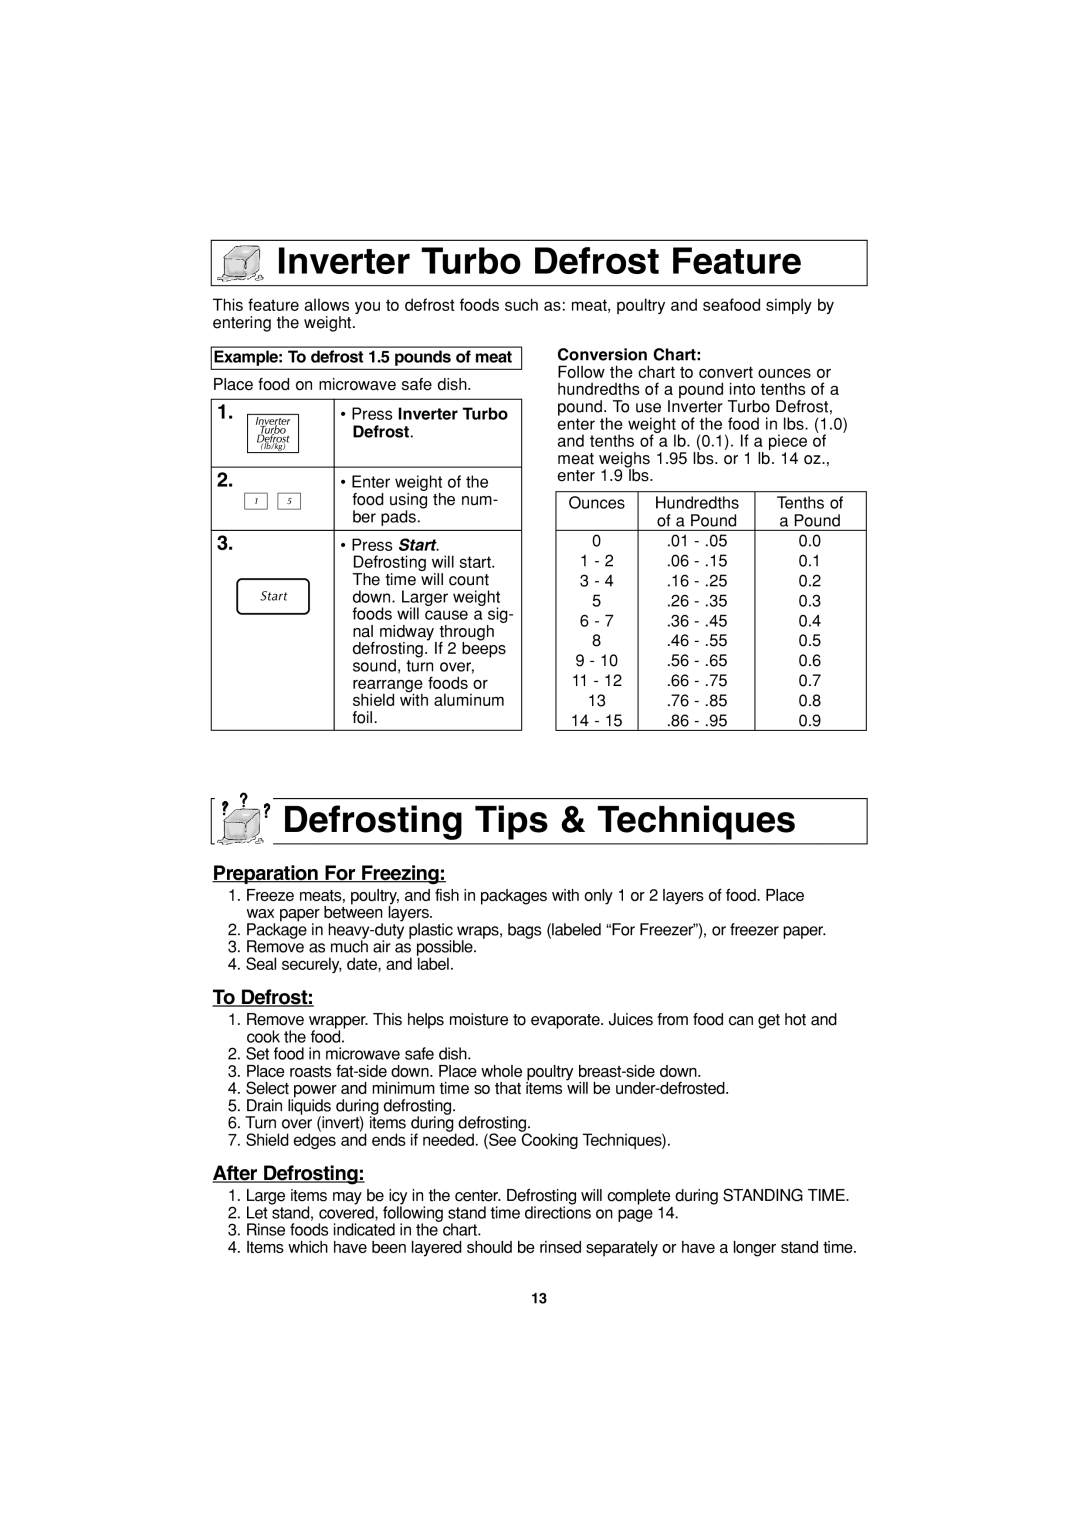 Panasonic NN-S423 Inverter Turbo Defrost Feature, Defrosting Tips & Techniques, Preparation For Freezing, To Defrost 